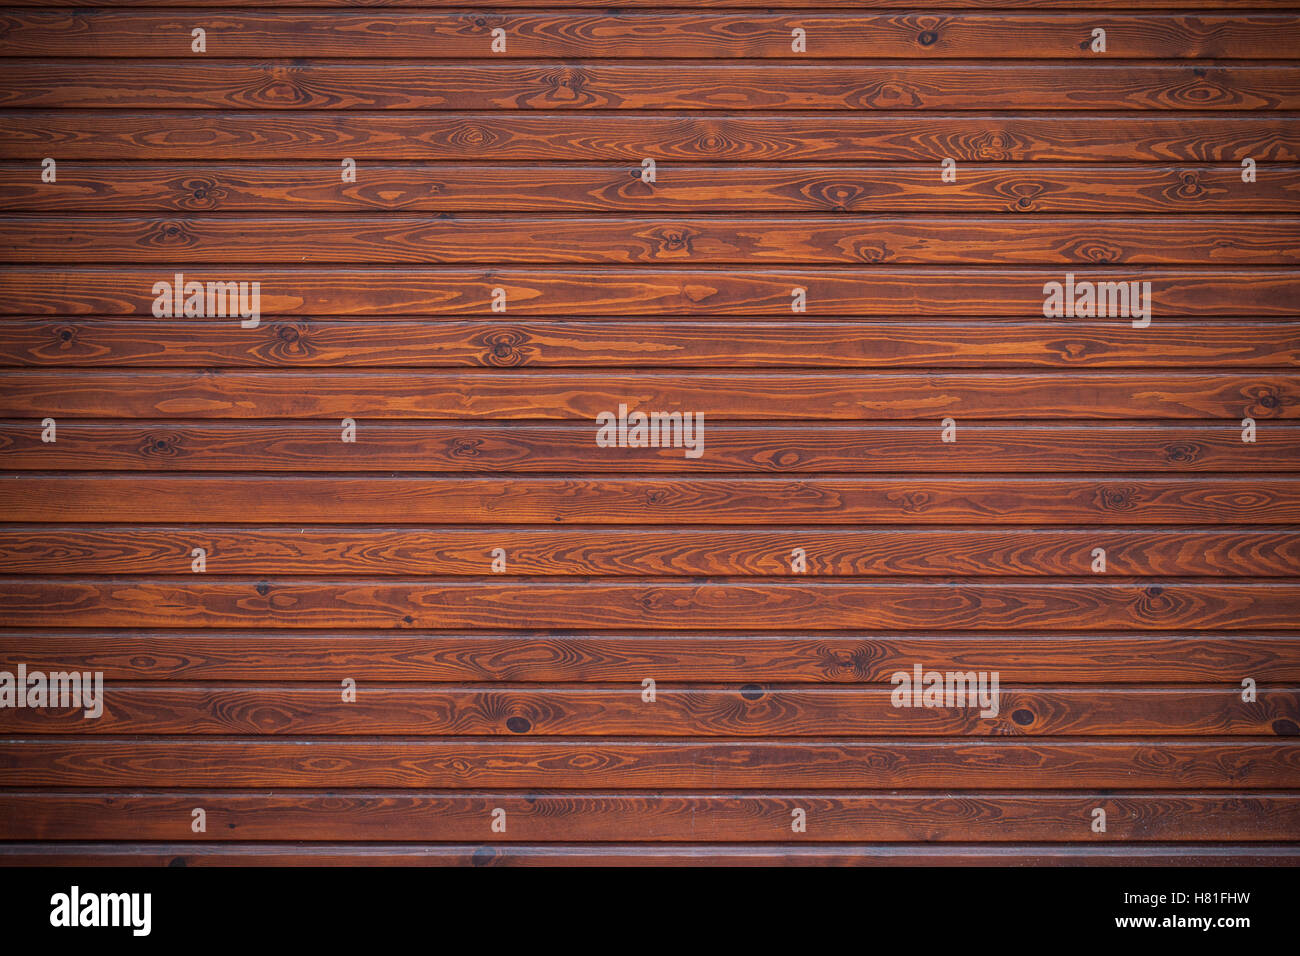 Wood plank texture with dramatic shadows Stock Photo